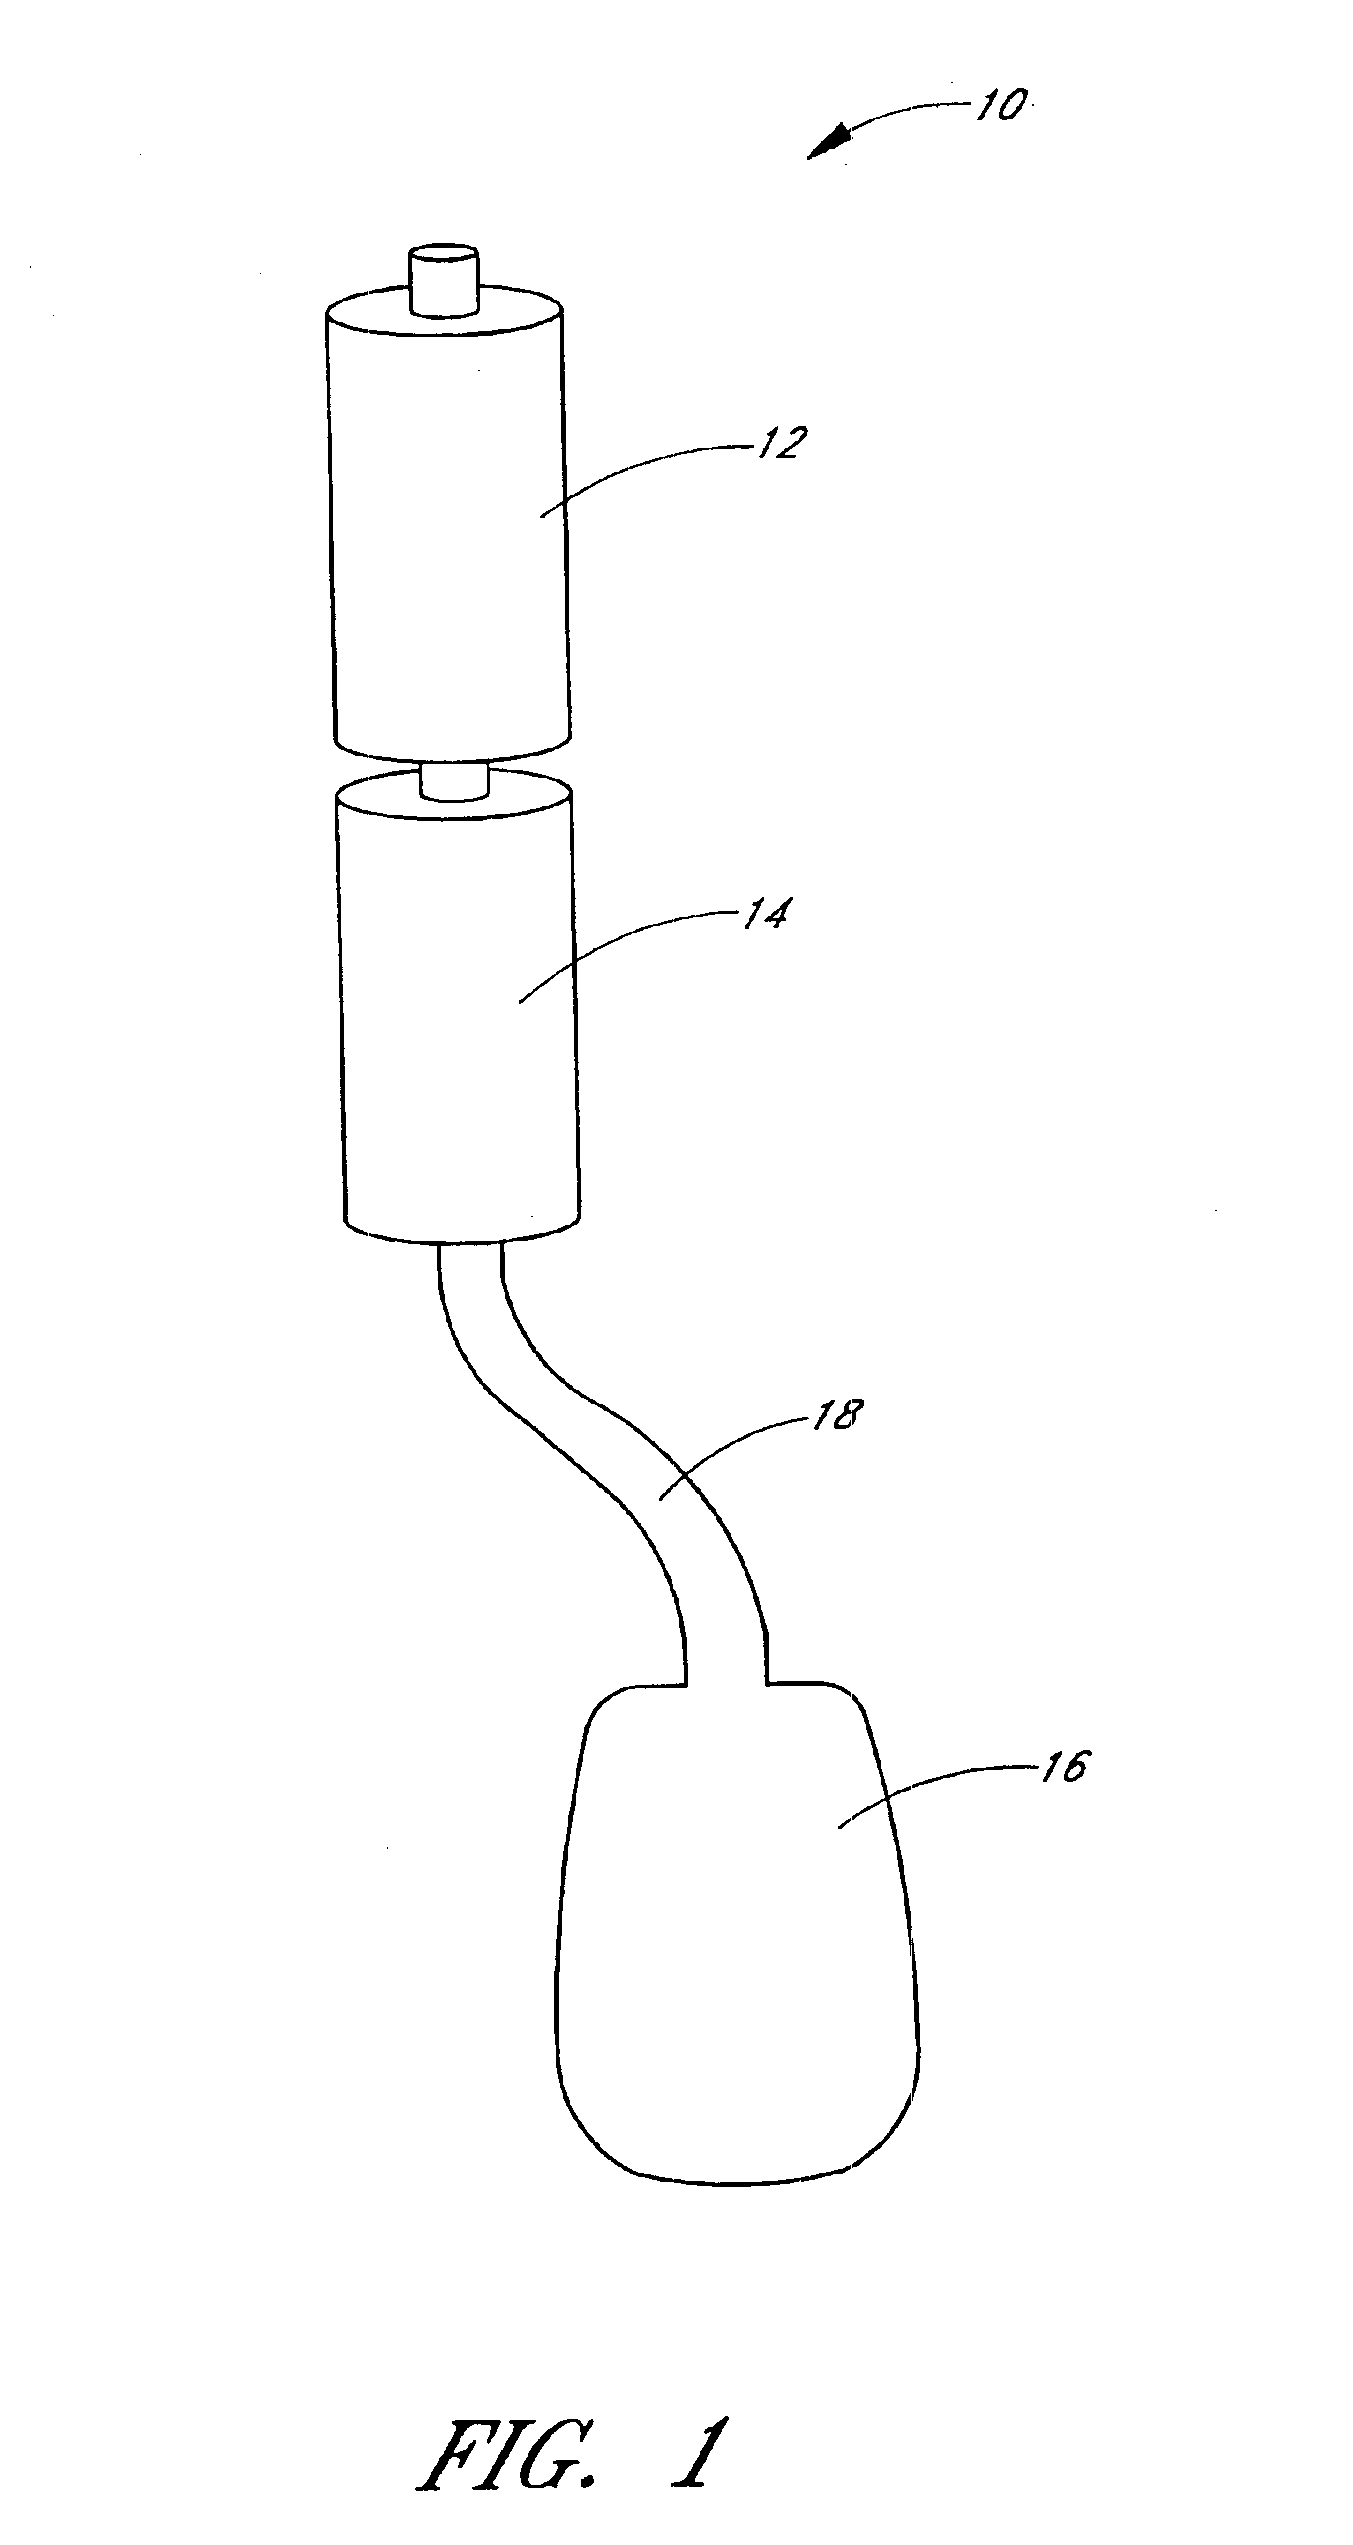 Apparatus and method for preparation of a peritoneal dialysis solution